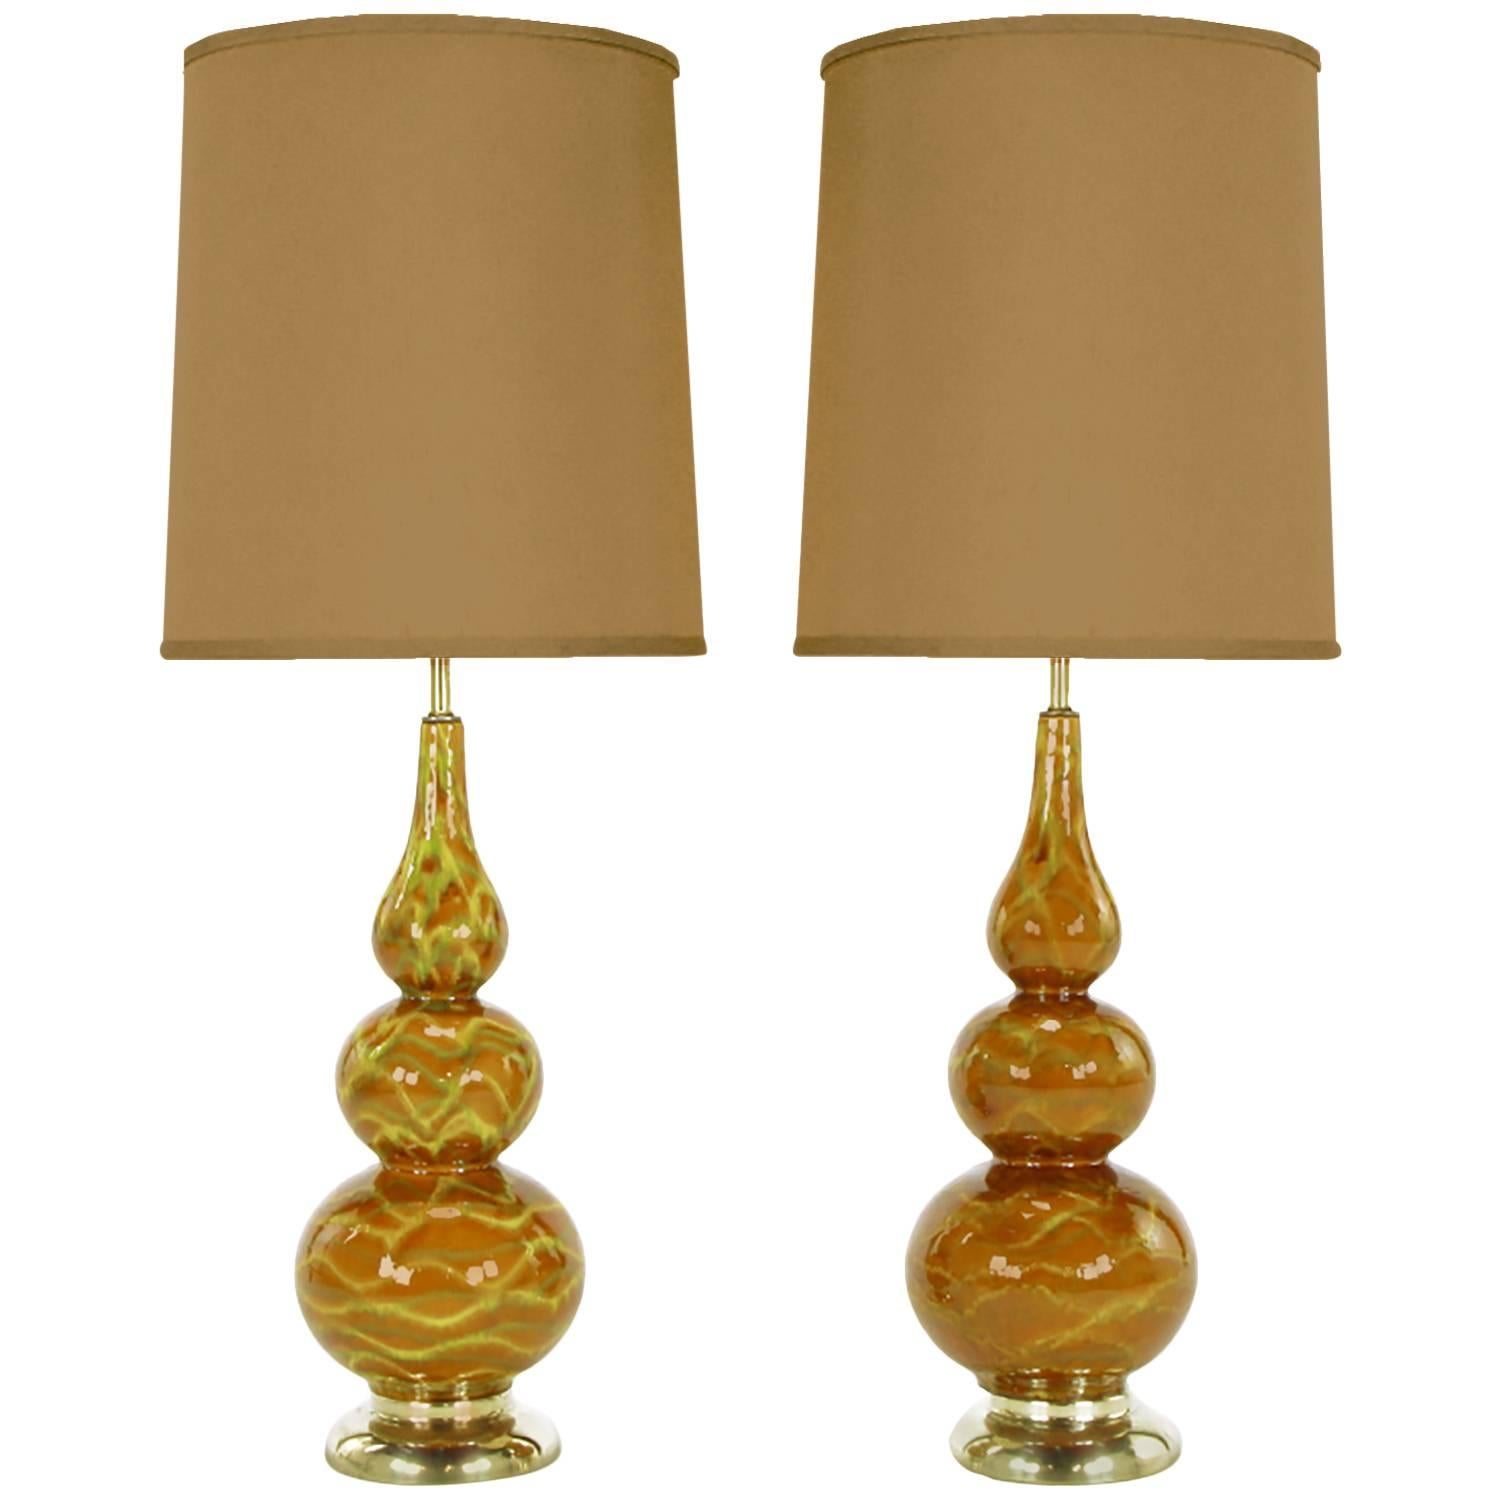 Pair of Caramel Glazed Ceramic Triple Gourd Form Table Lamps For Sale